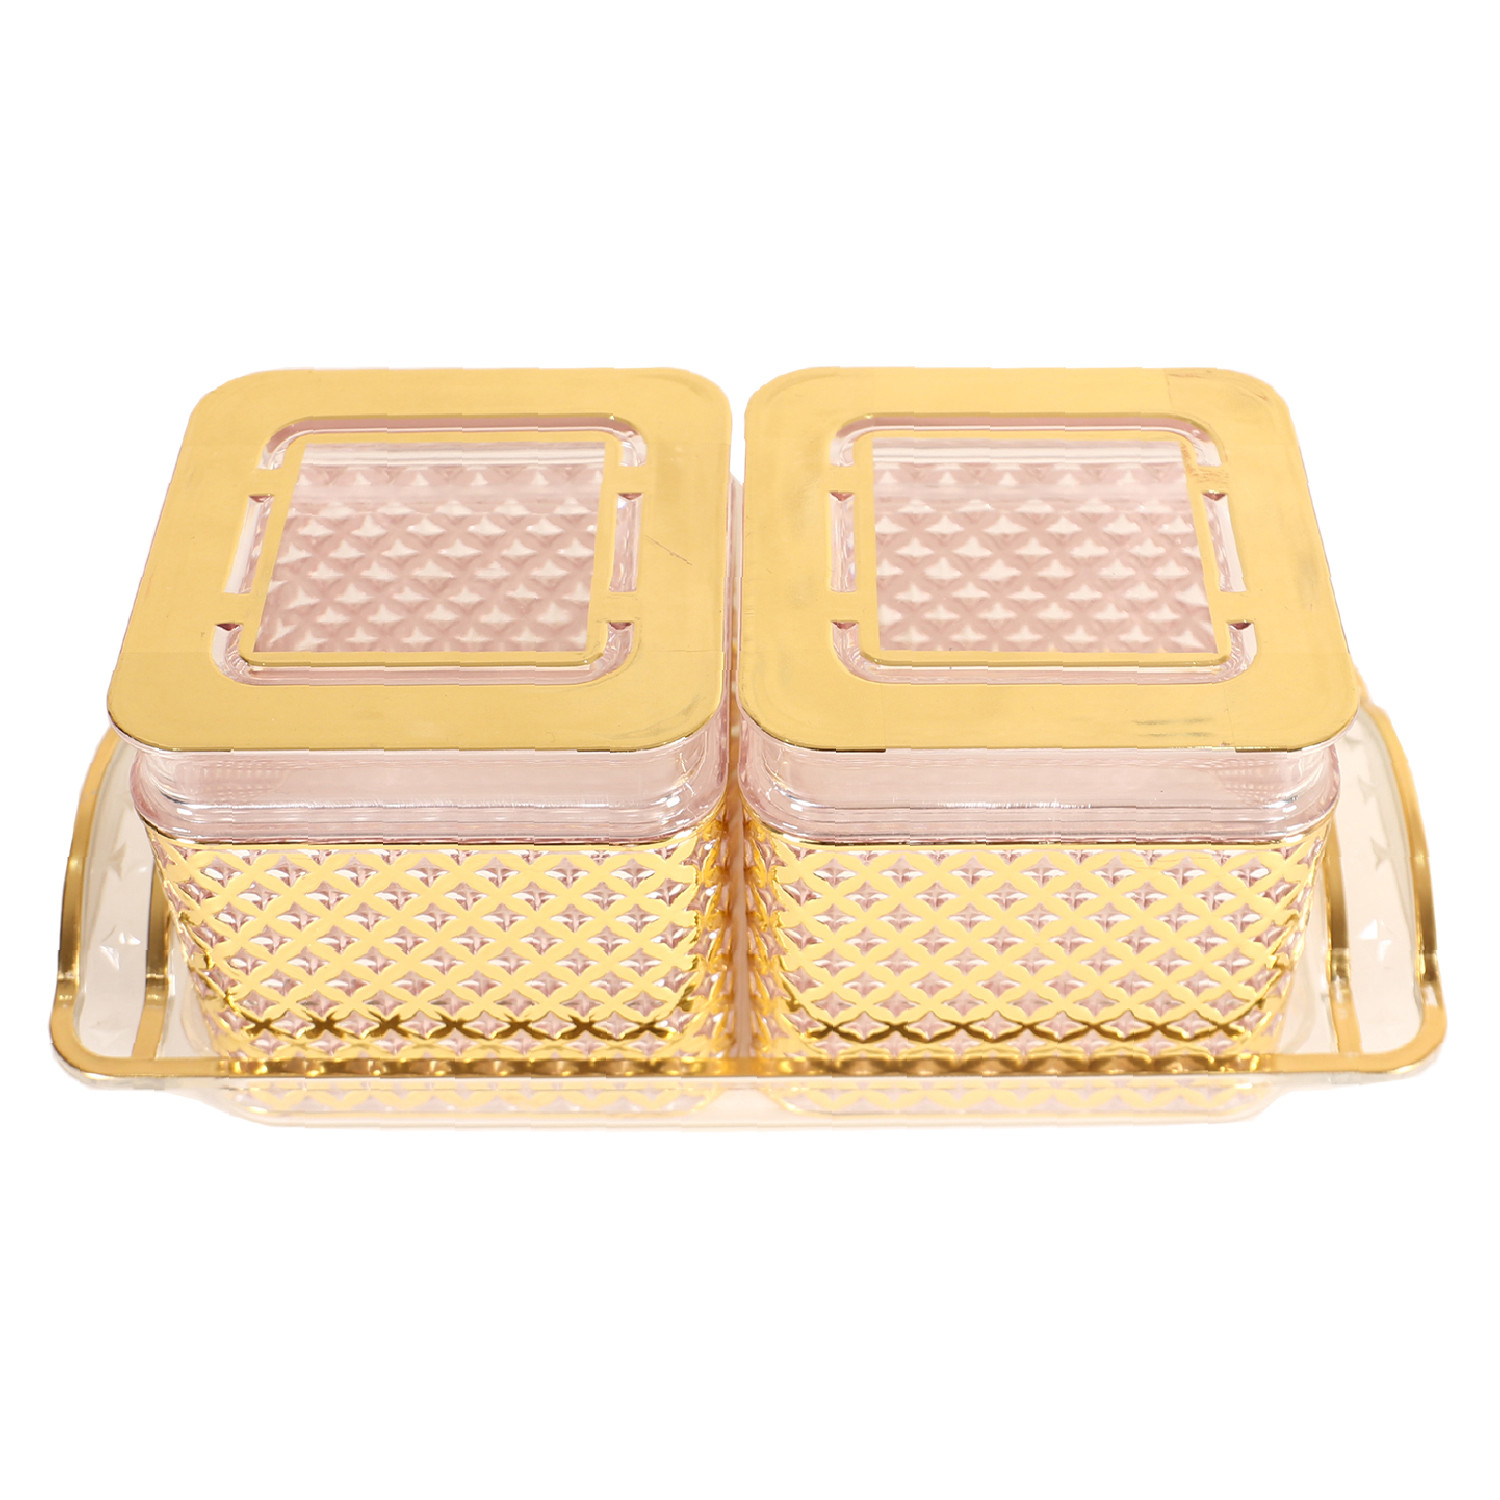 Kuber Industries 2 Containers & Tray Set|Unbreakable Gold Plated Plastic Snackers,Cookies,Nuts Serving Tray|Airtight Containers with Lid,400 ml (Gold)